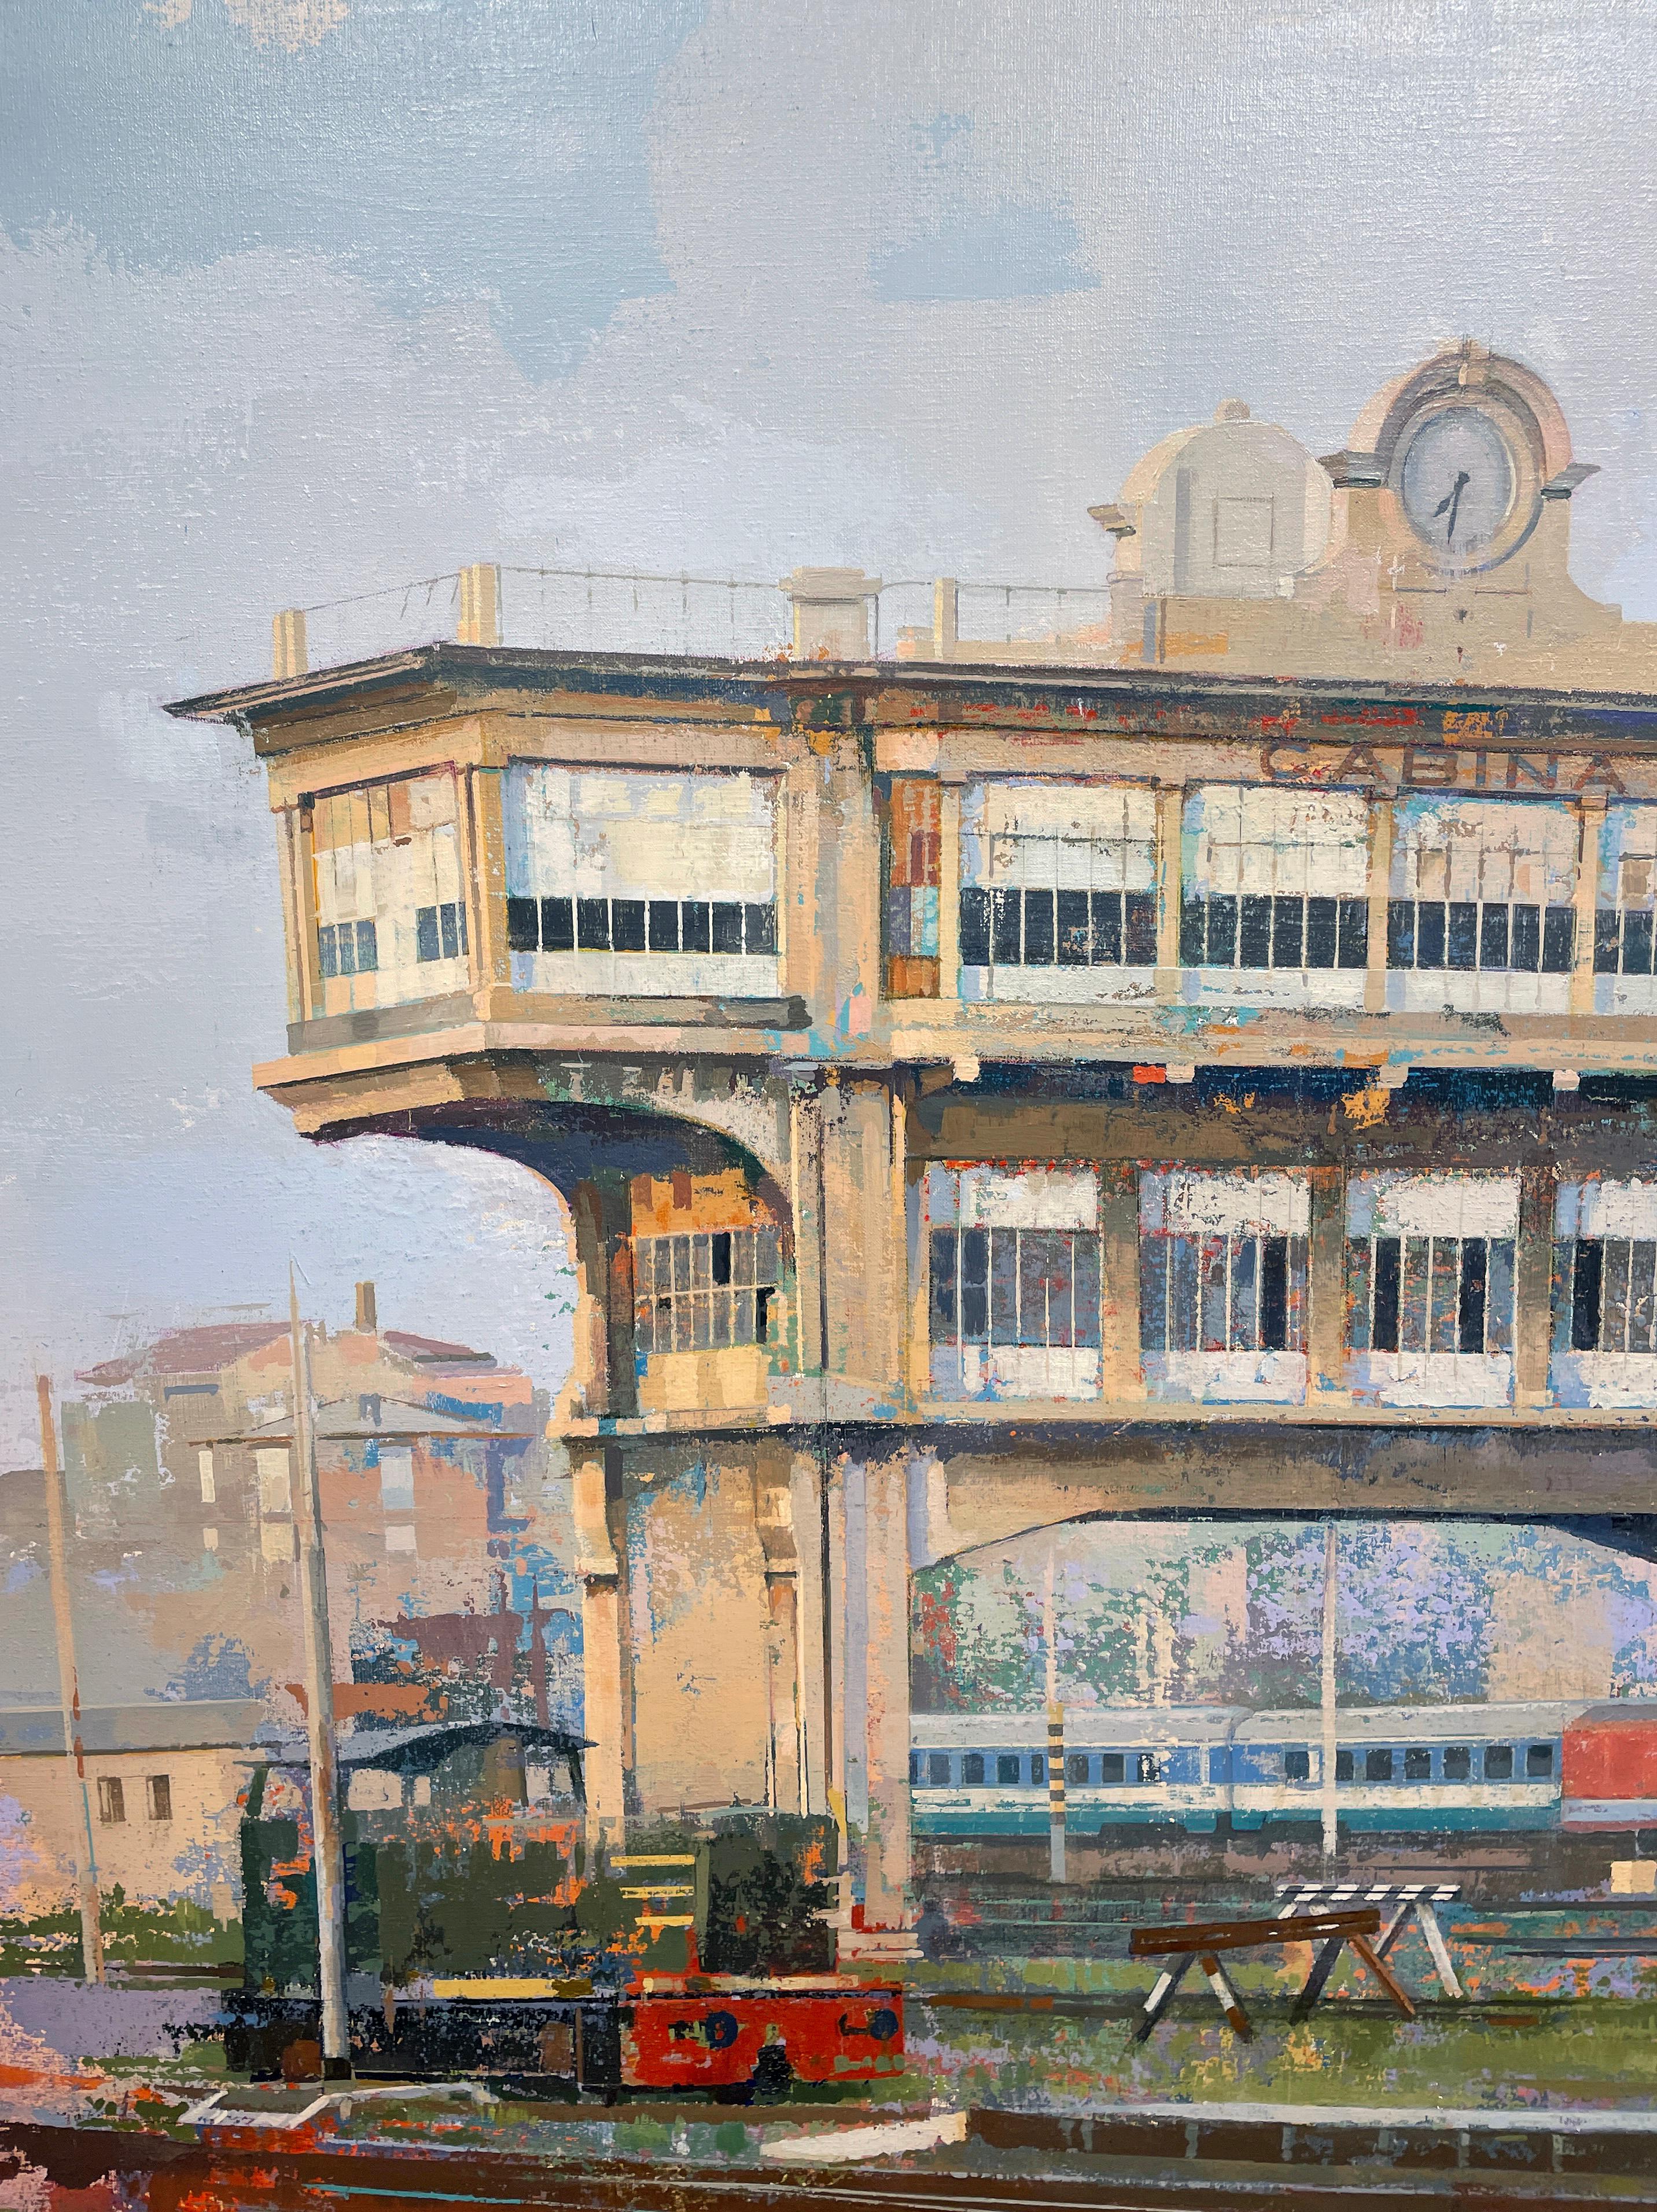 Cabana A - Abstracted Urban Landscape of Tower at Milano Centrale Train Station - Contemporary Painting by Albert Vidal Moreno